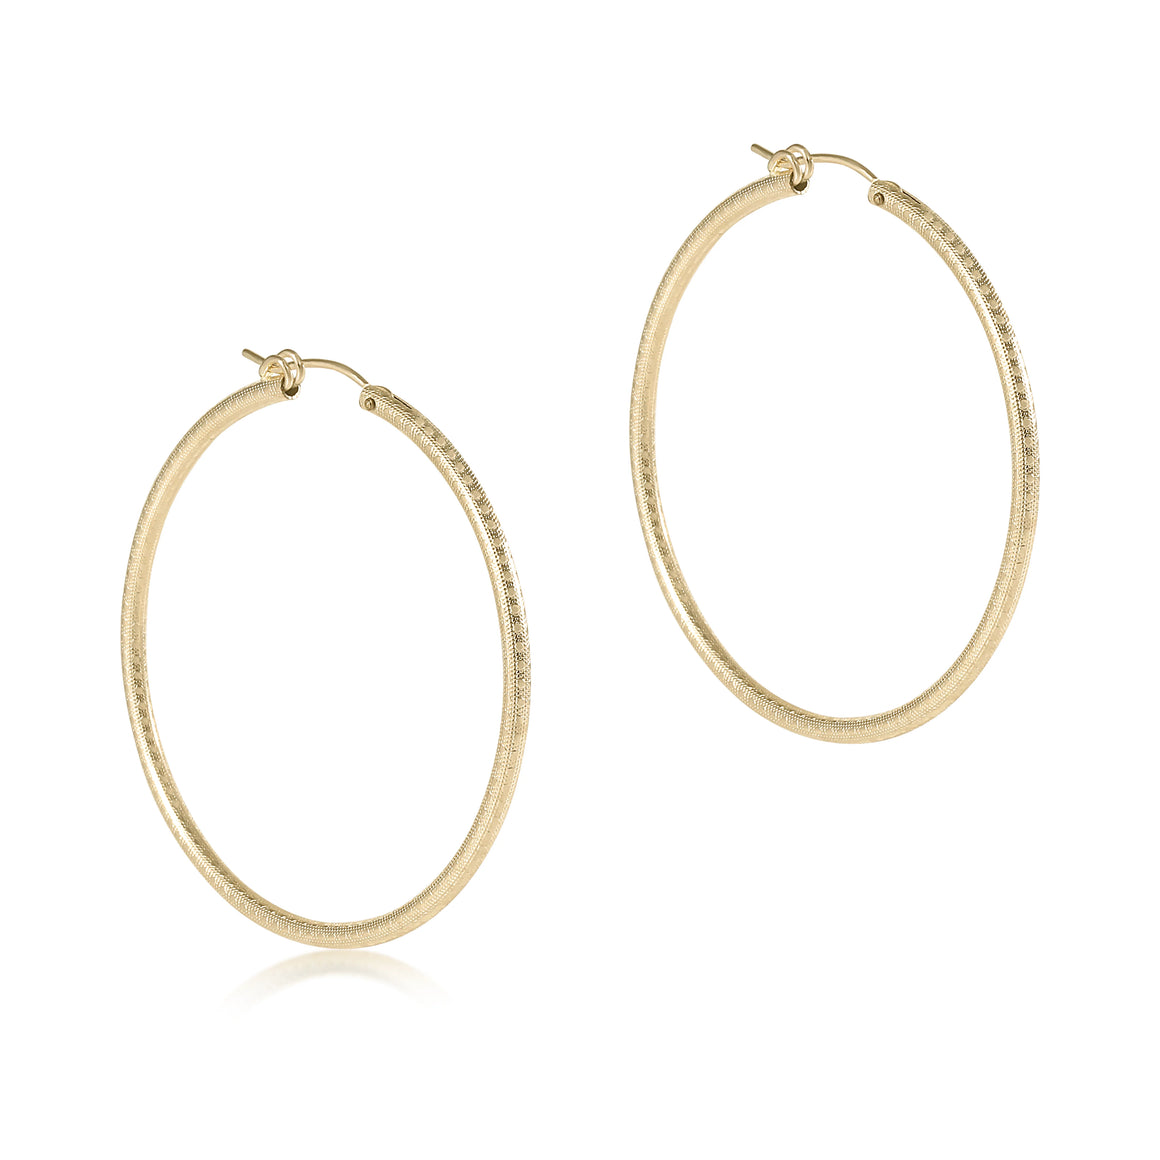 2" Round Gold Hoop Earring - Textured